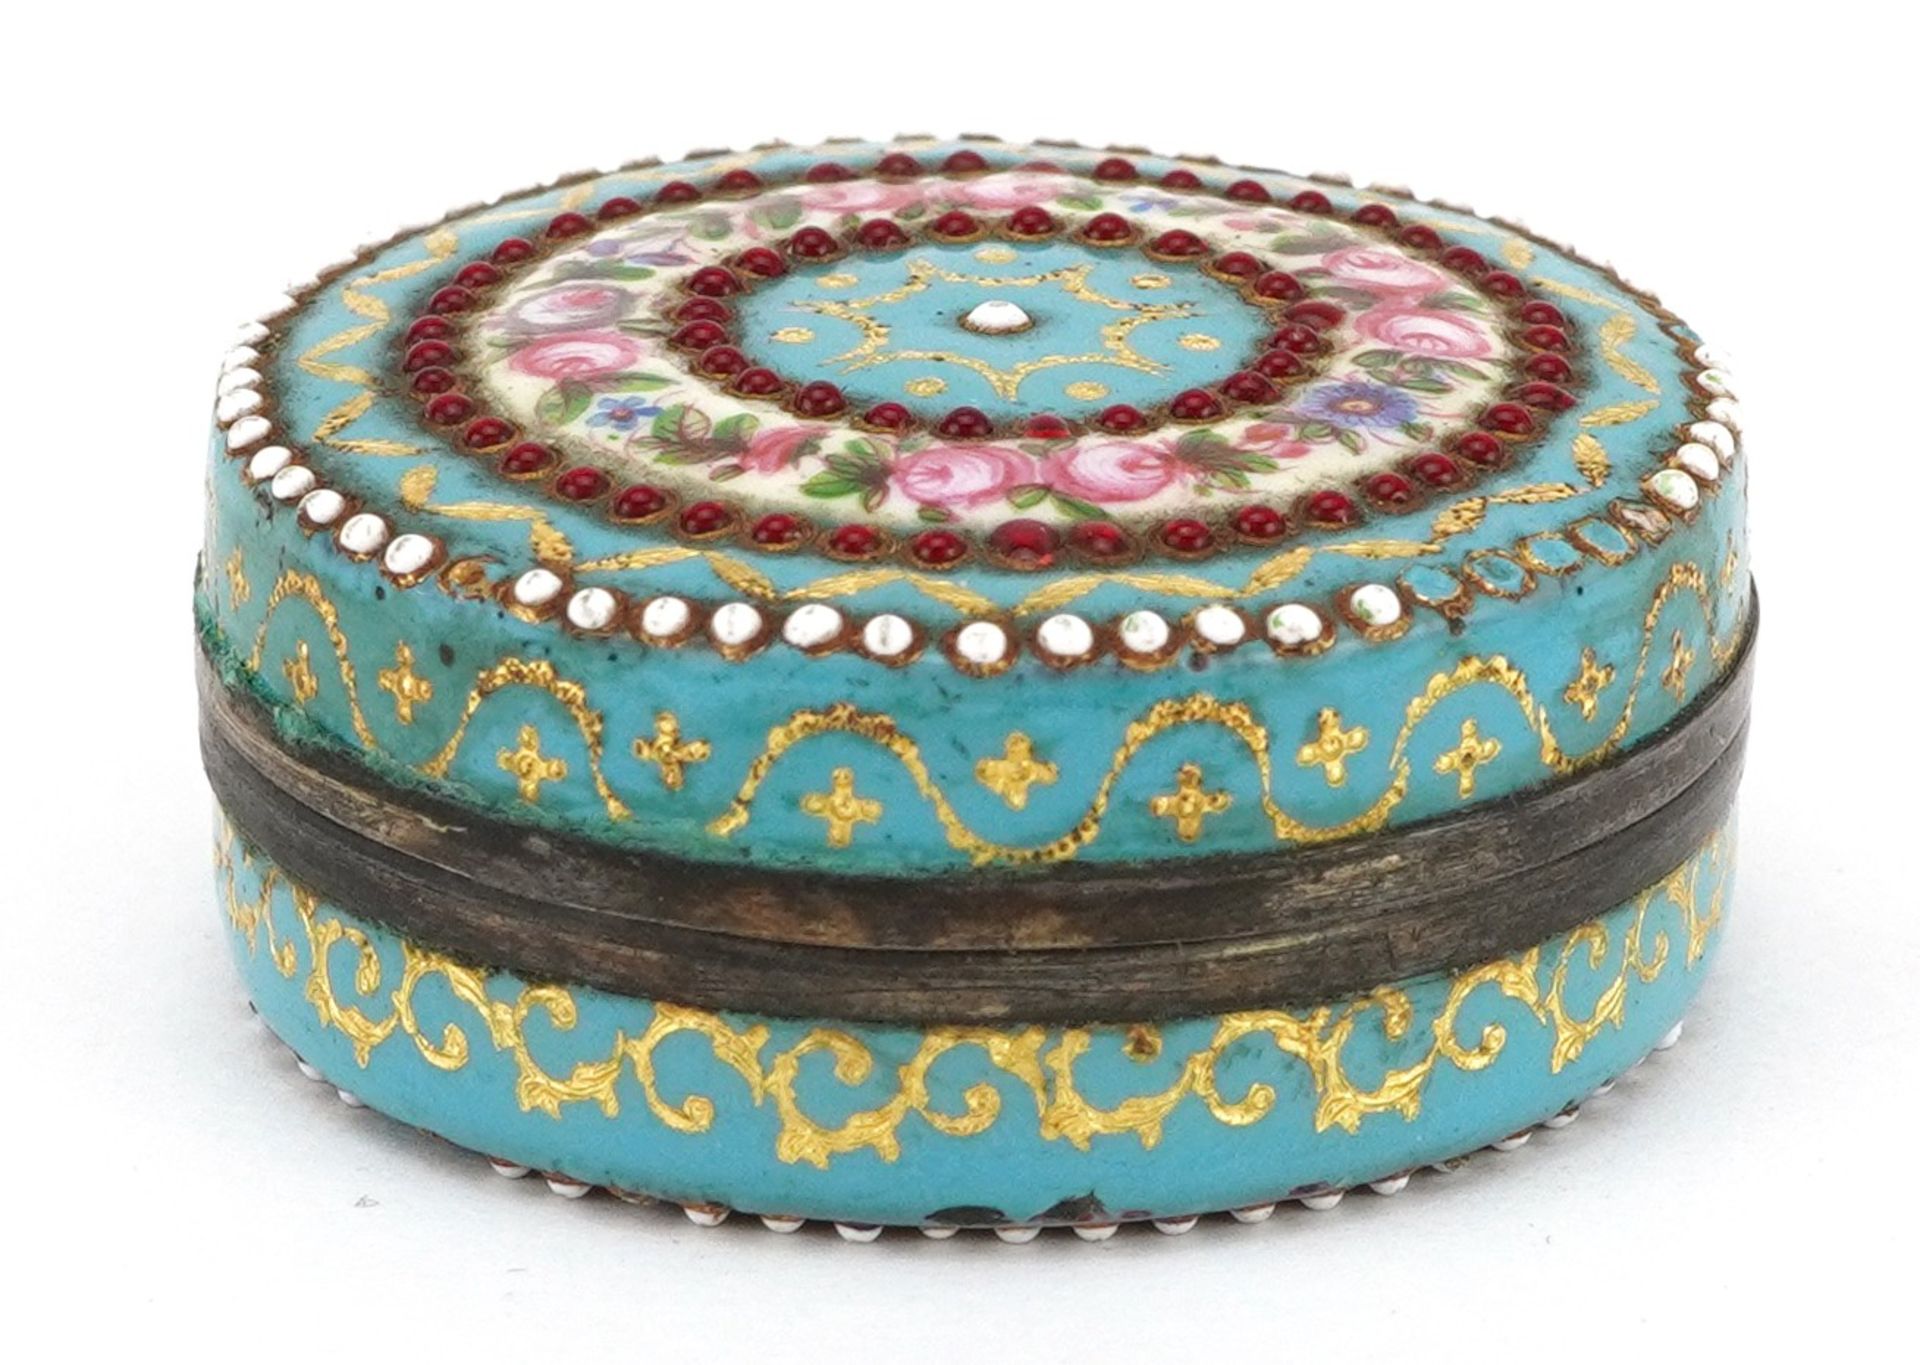 19th century French silver mounted enamel jewelled patch box hand painted with flowers, 4cm in